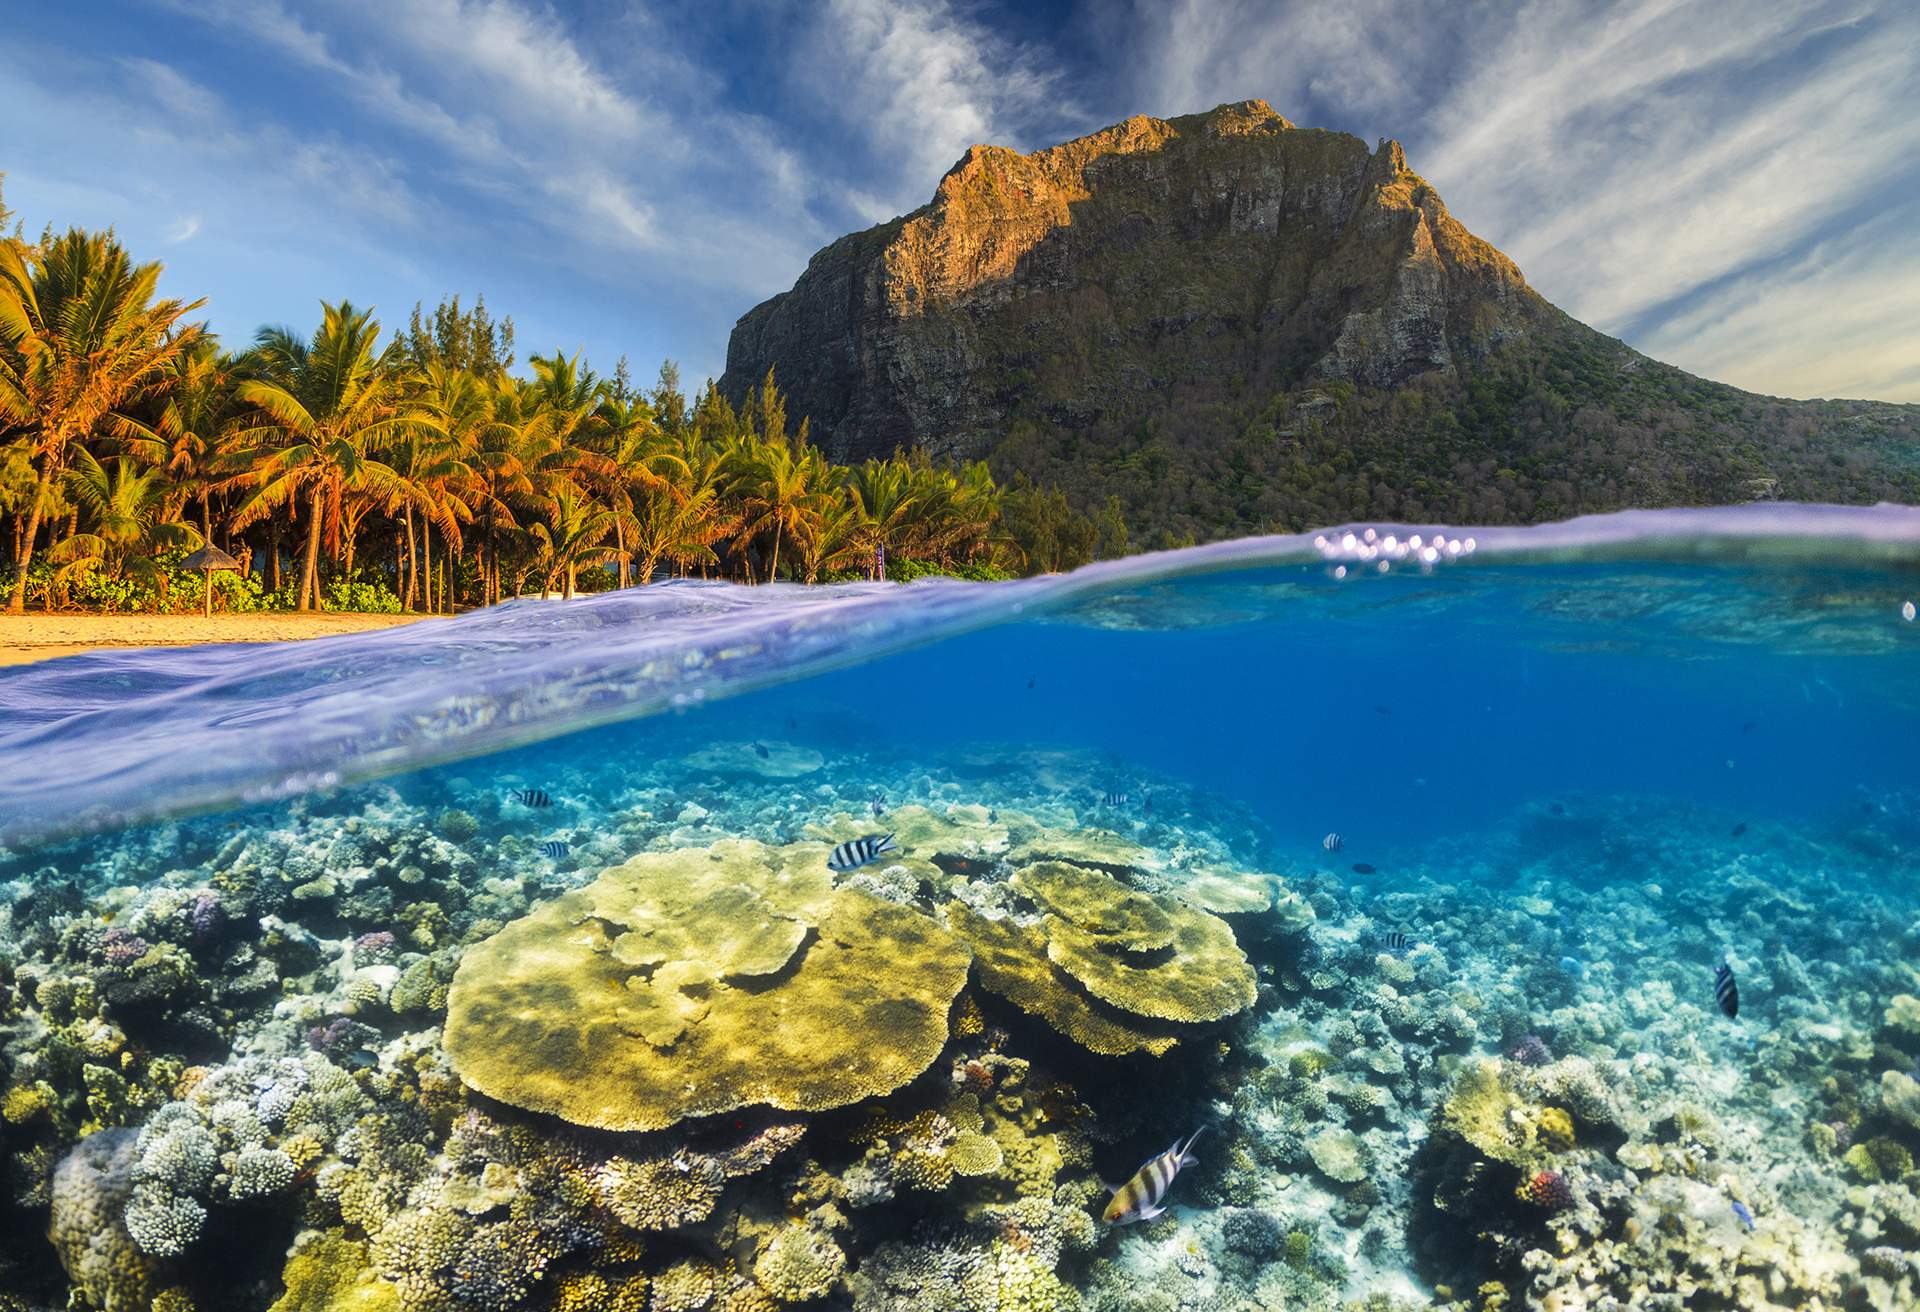 UNDERWATER VIEW OF MAURITIUS AND MOUNTAIN